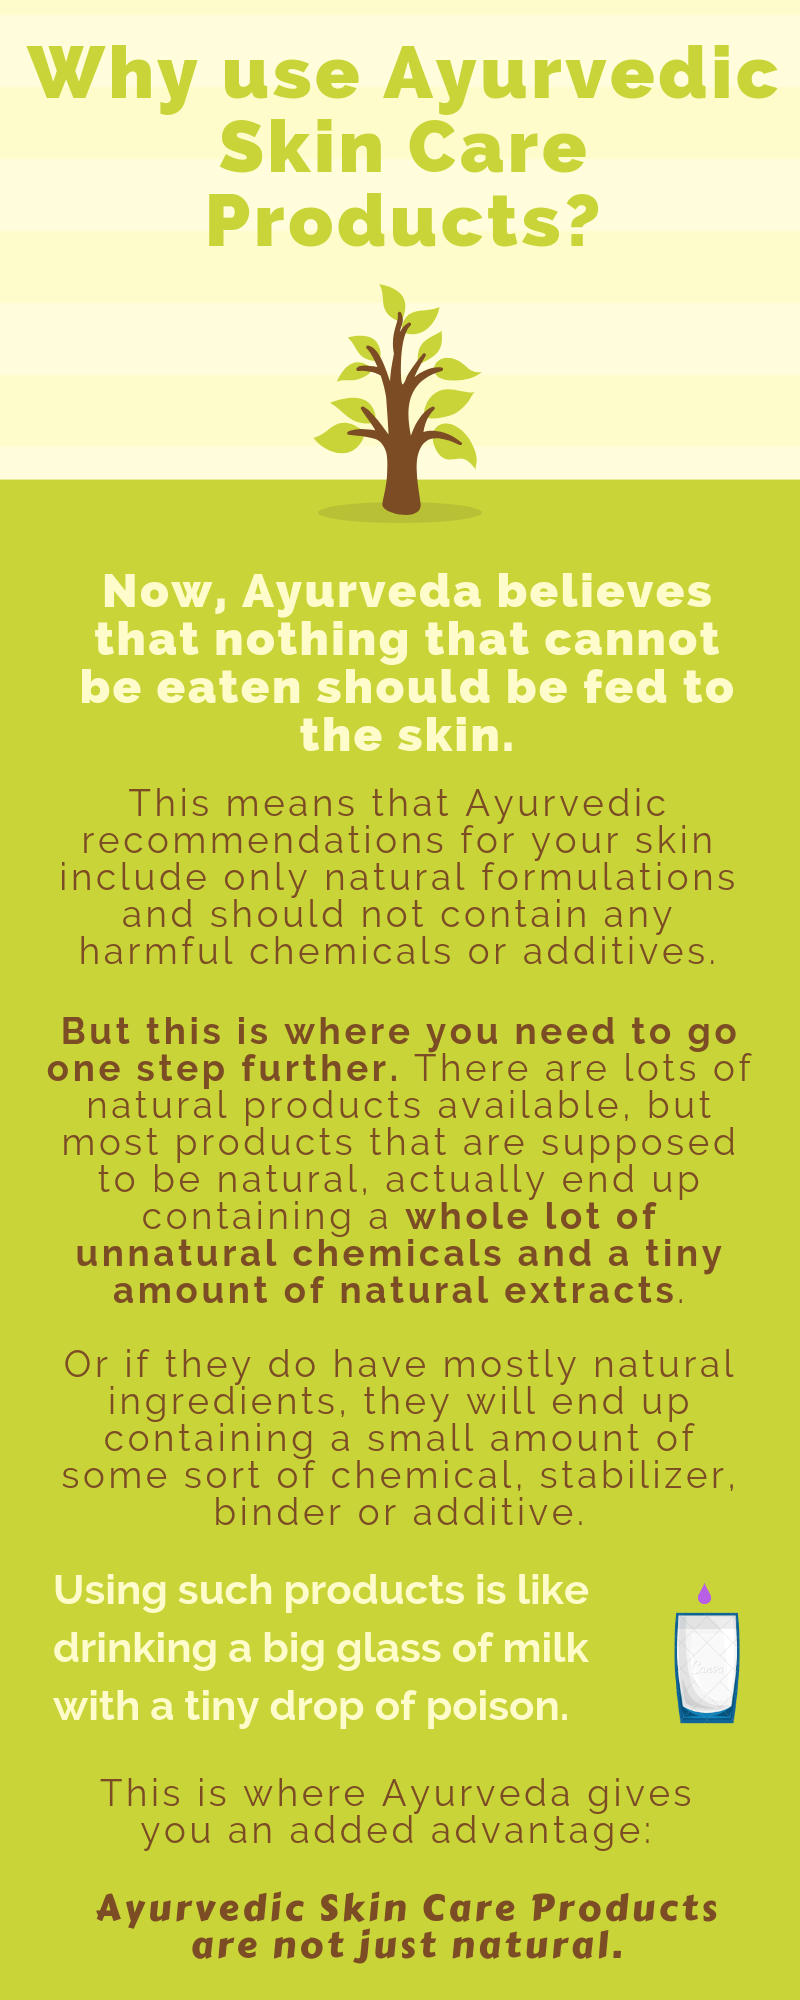 Why use Ayurvedic Skincare products?